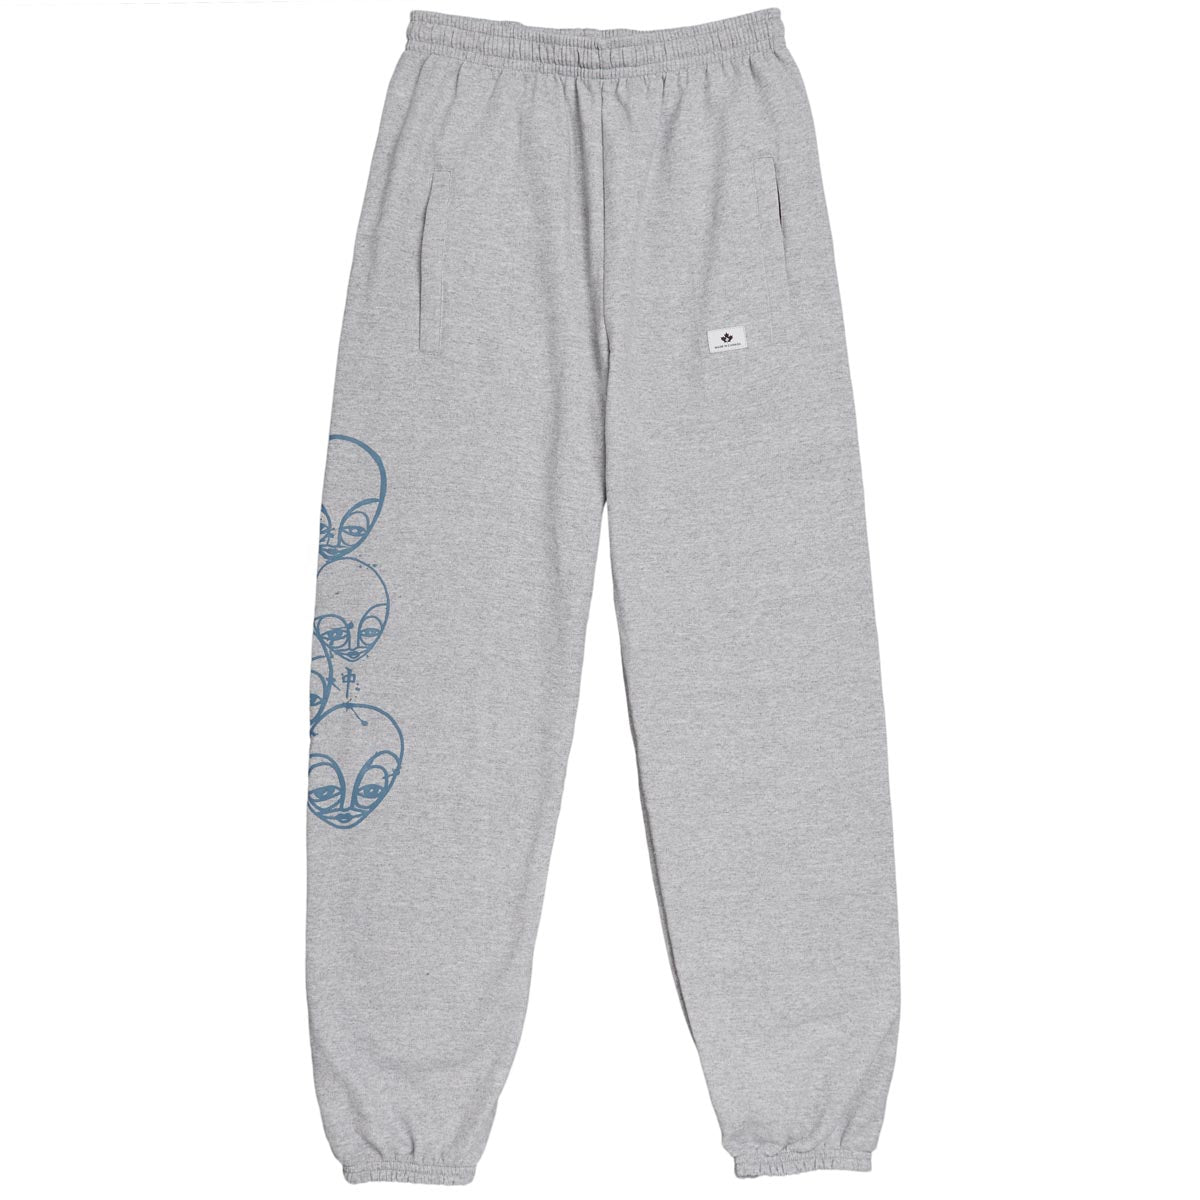 RDS x Kris Markovich Faces Sweat Pants - Athletic Heather image 1